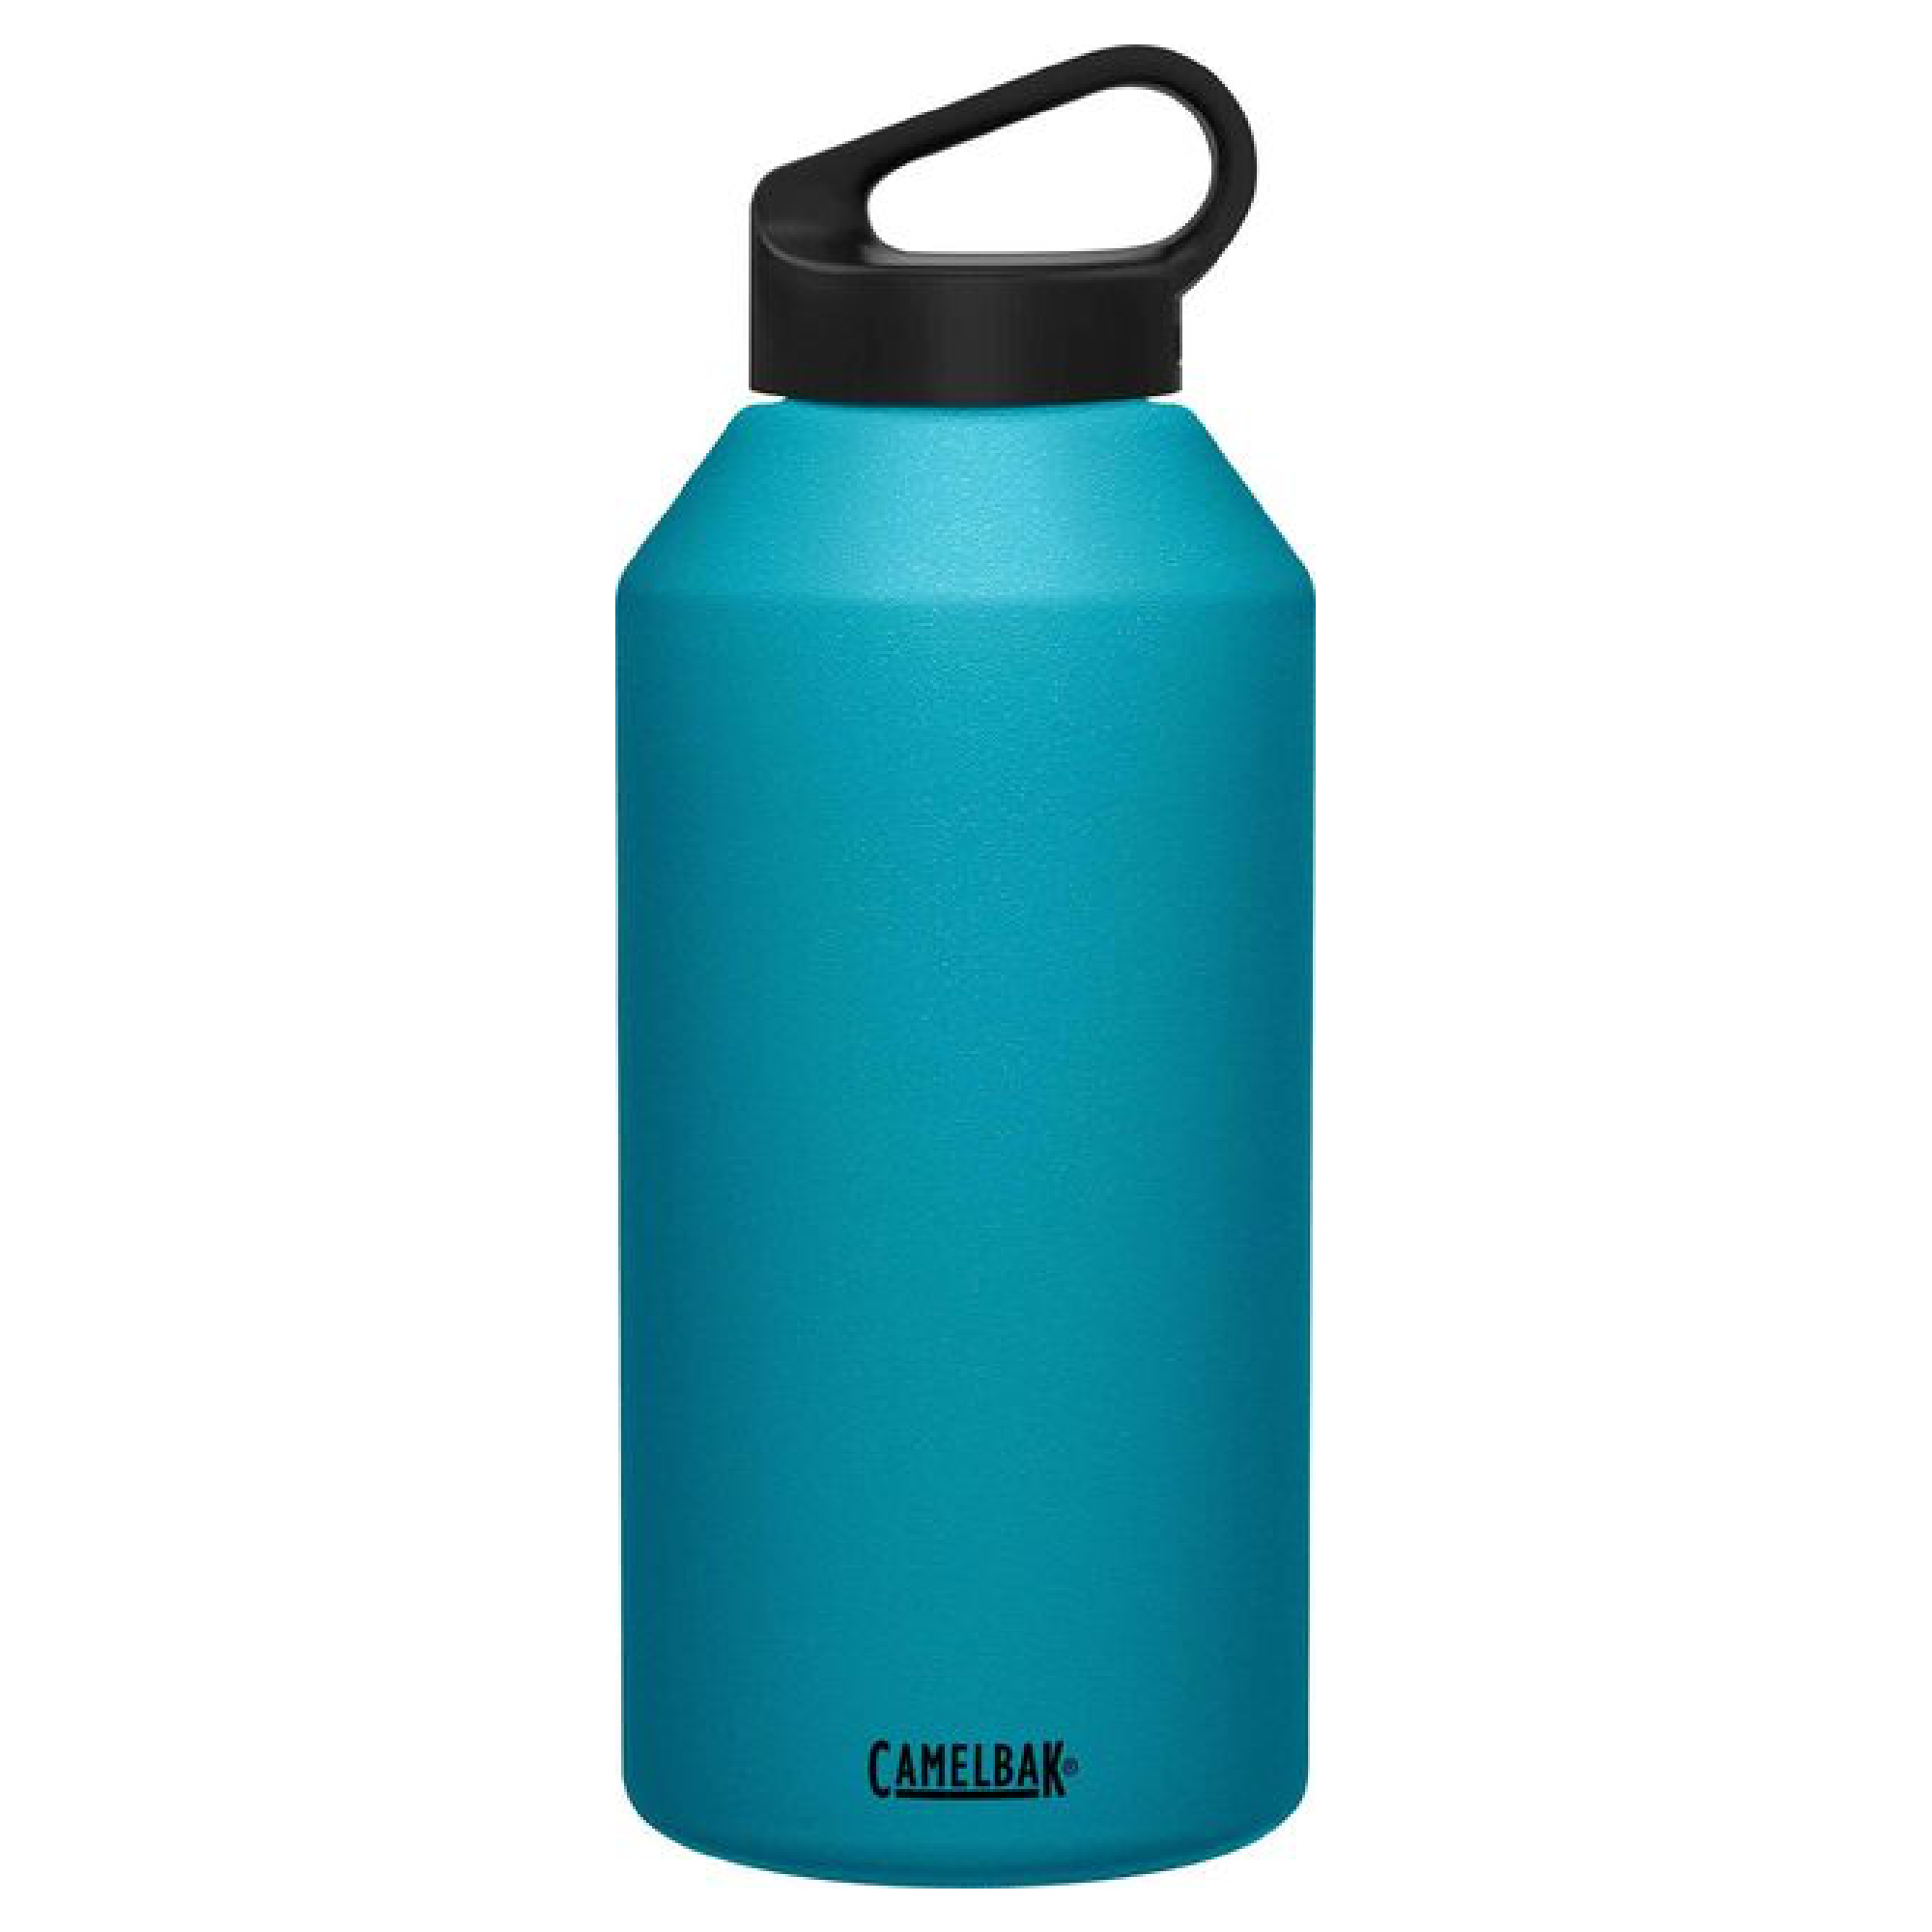 CamelBak | Carry Cap Insulated Stainless Steel Drink Bottle | 2L